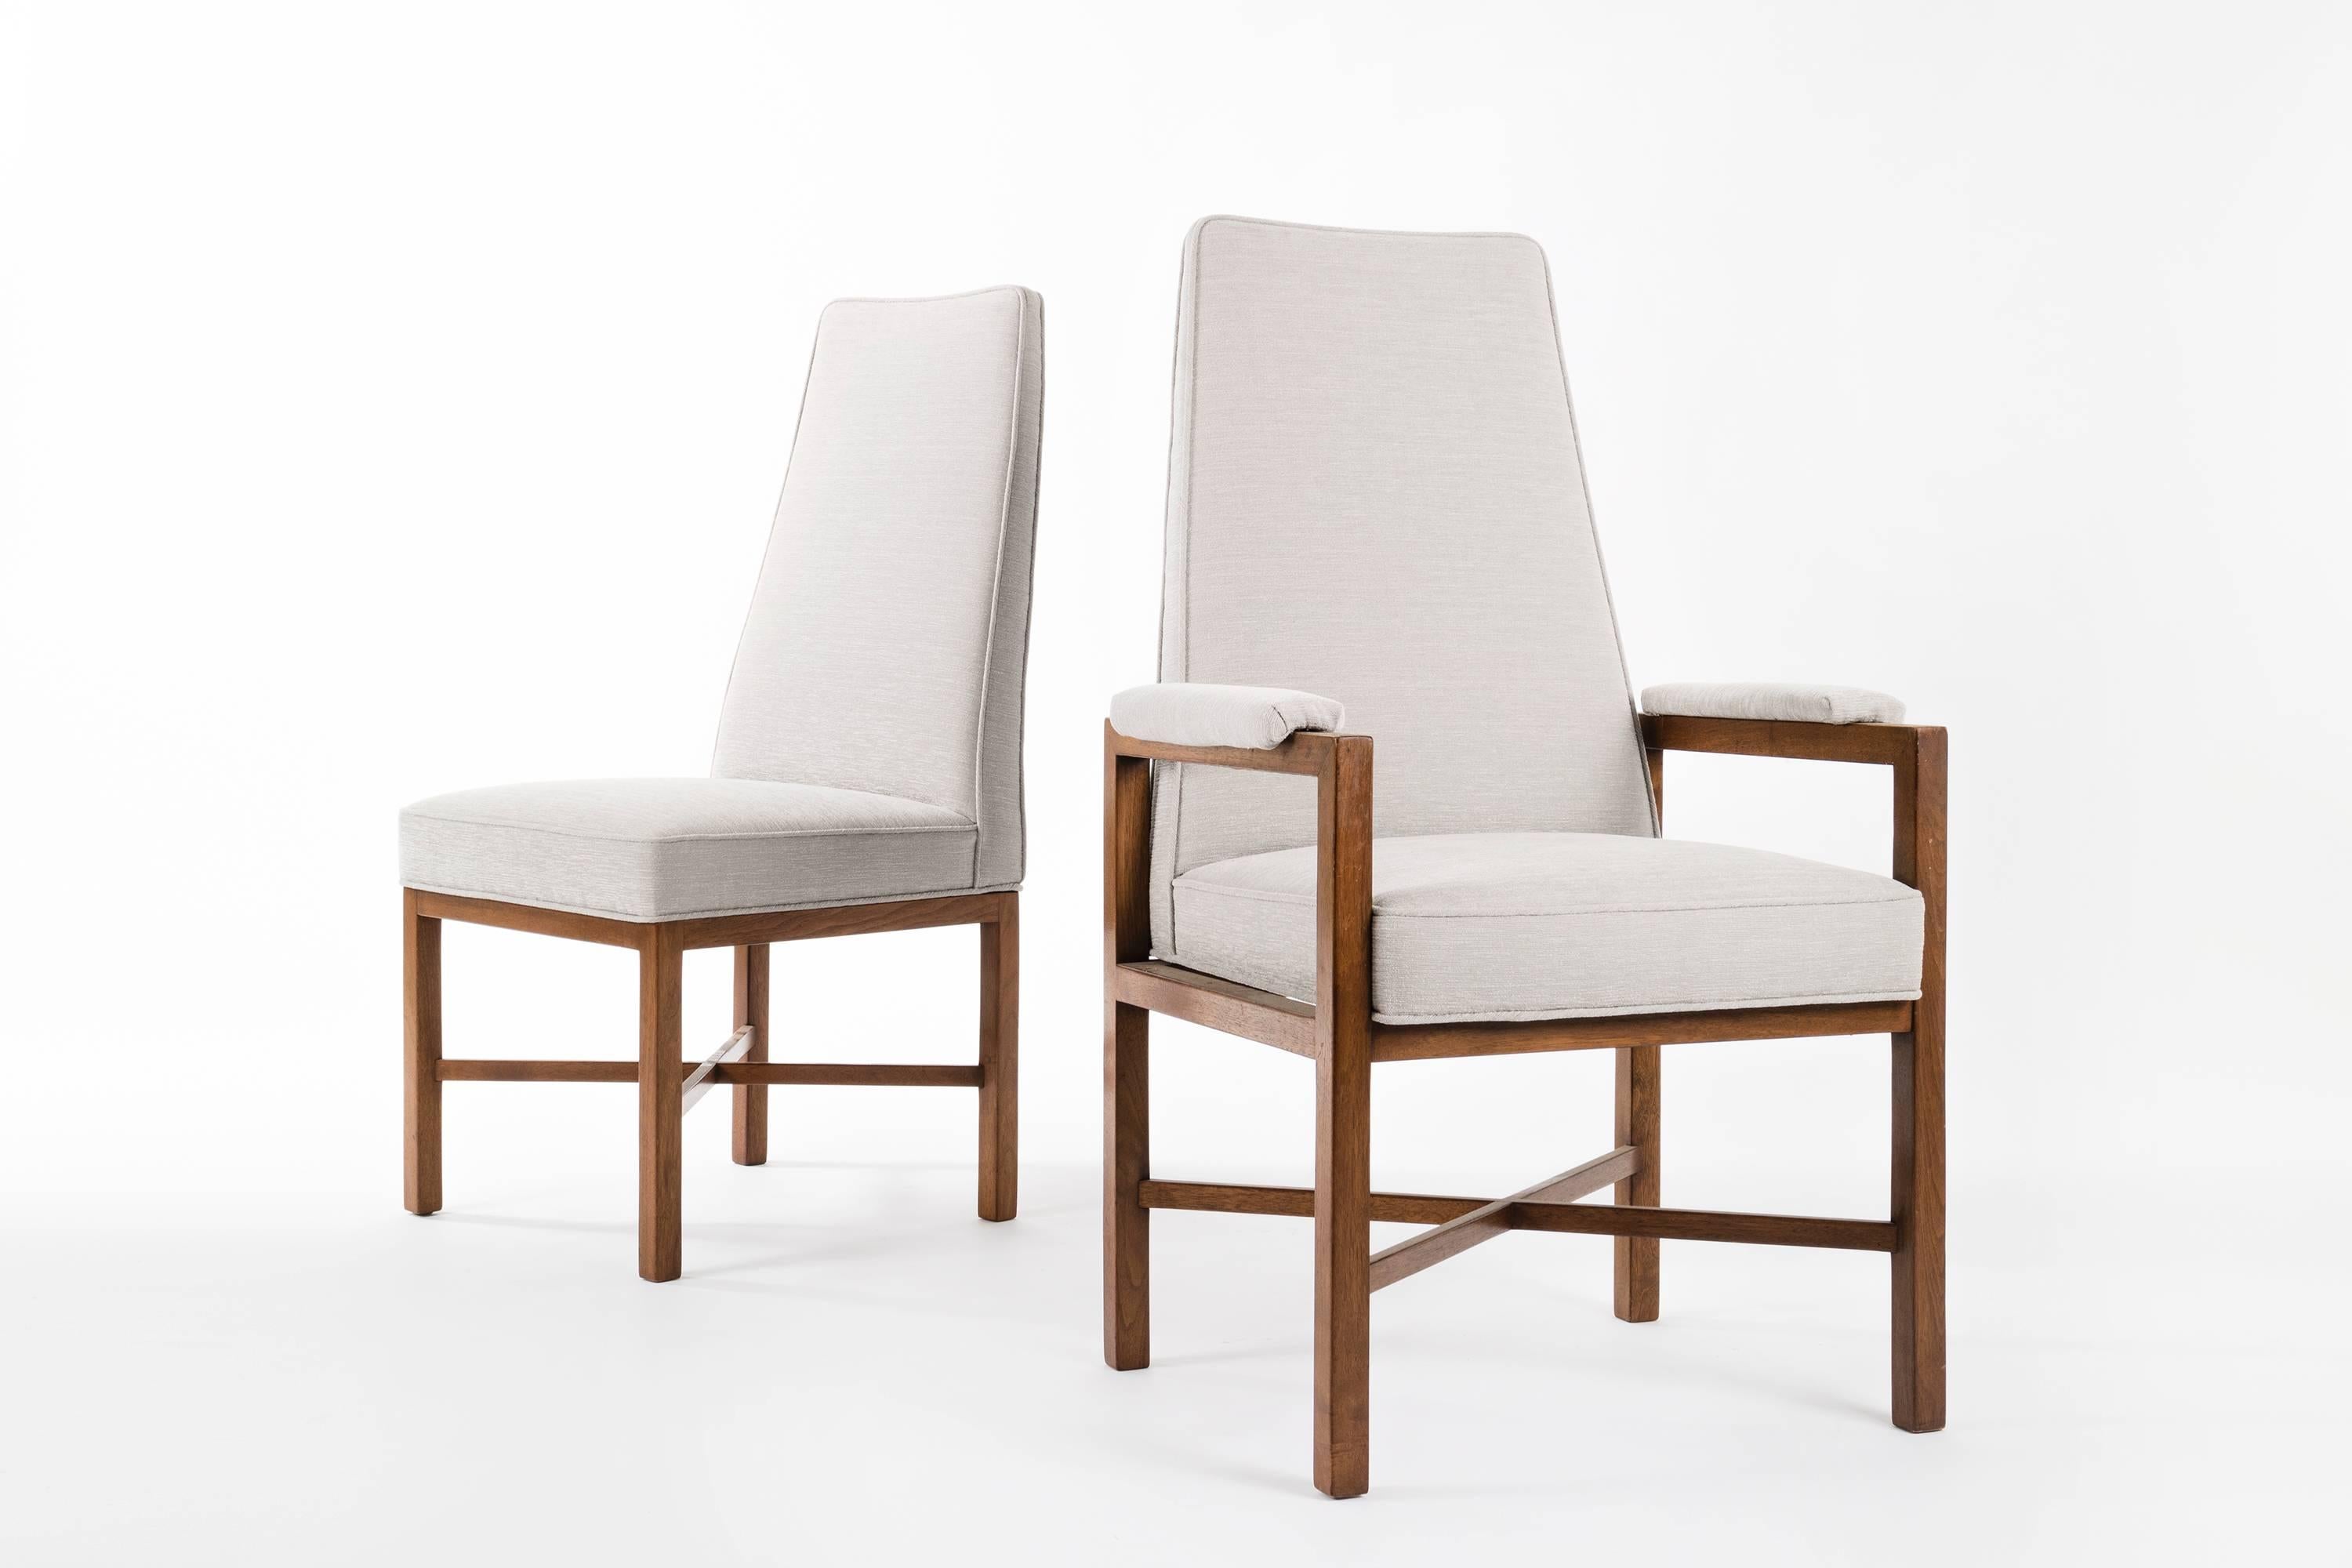 Set of eight dining chairs designed by Edward Wormley for Dunbar. Two armchairs and six armless chairs.

Armchair.
Measures: 42.75